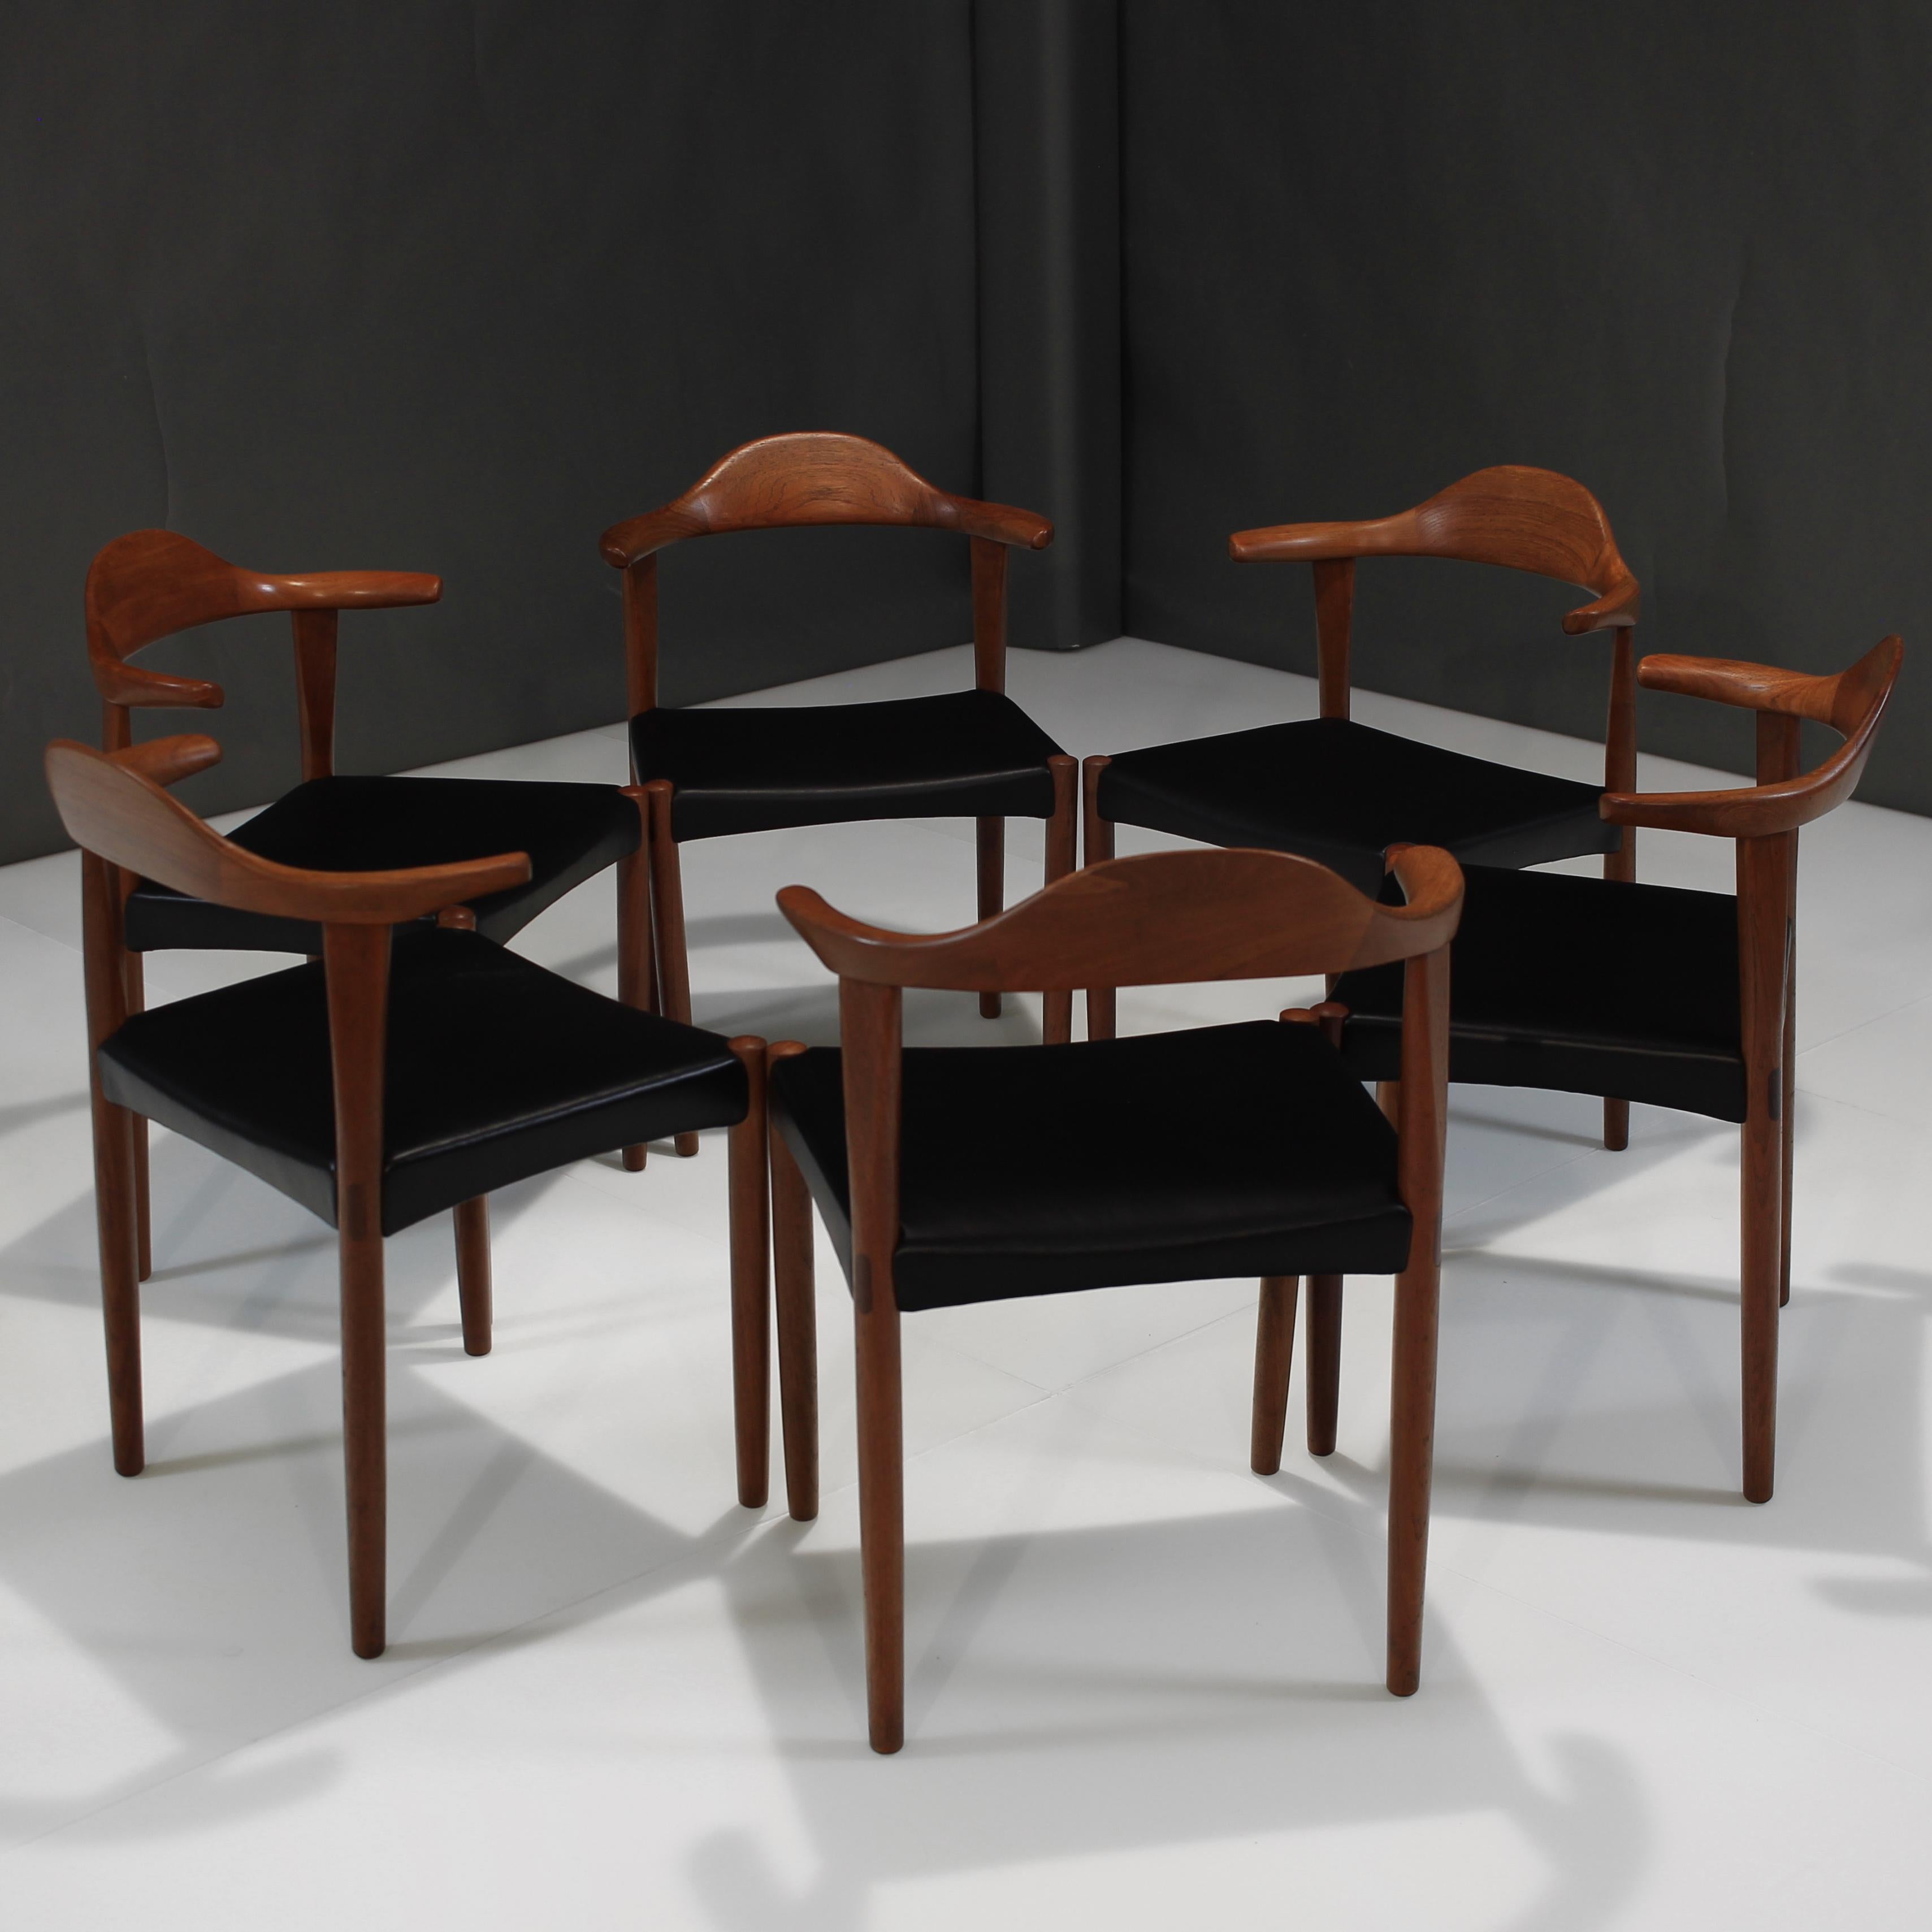 Oiled Set of Six (6) Harry Østergaard Teak Bull Horn Dining Chairs in Italian Leather